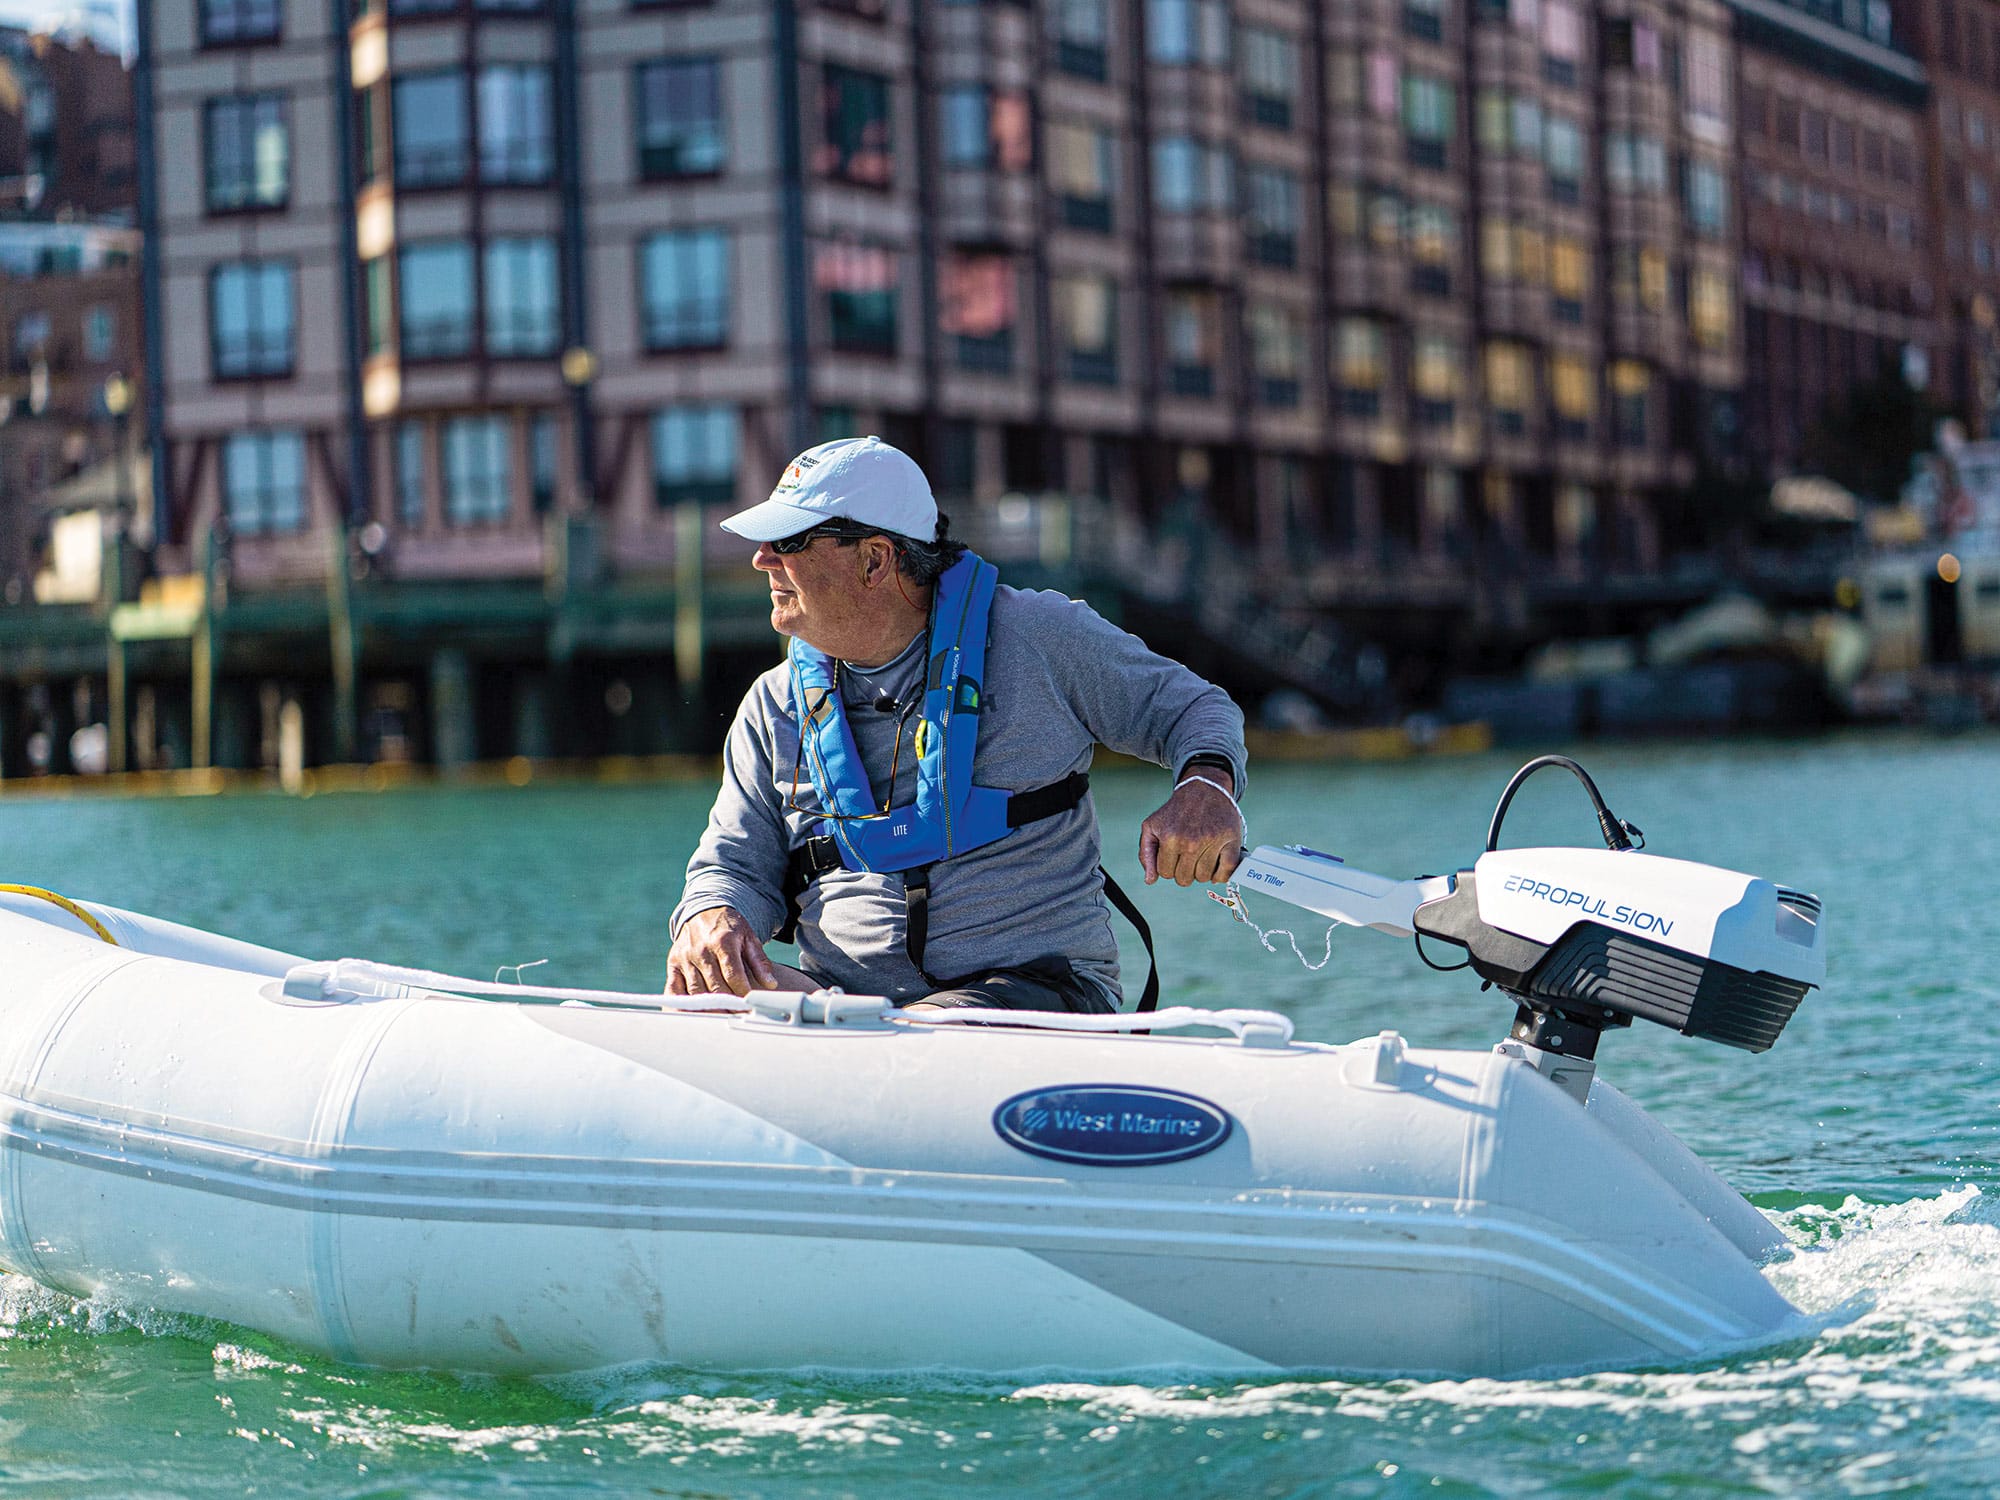 Gear Test: Electric Motors for Dinghy Engines